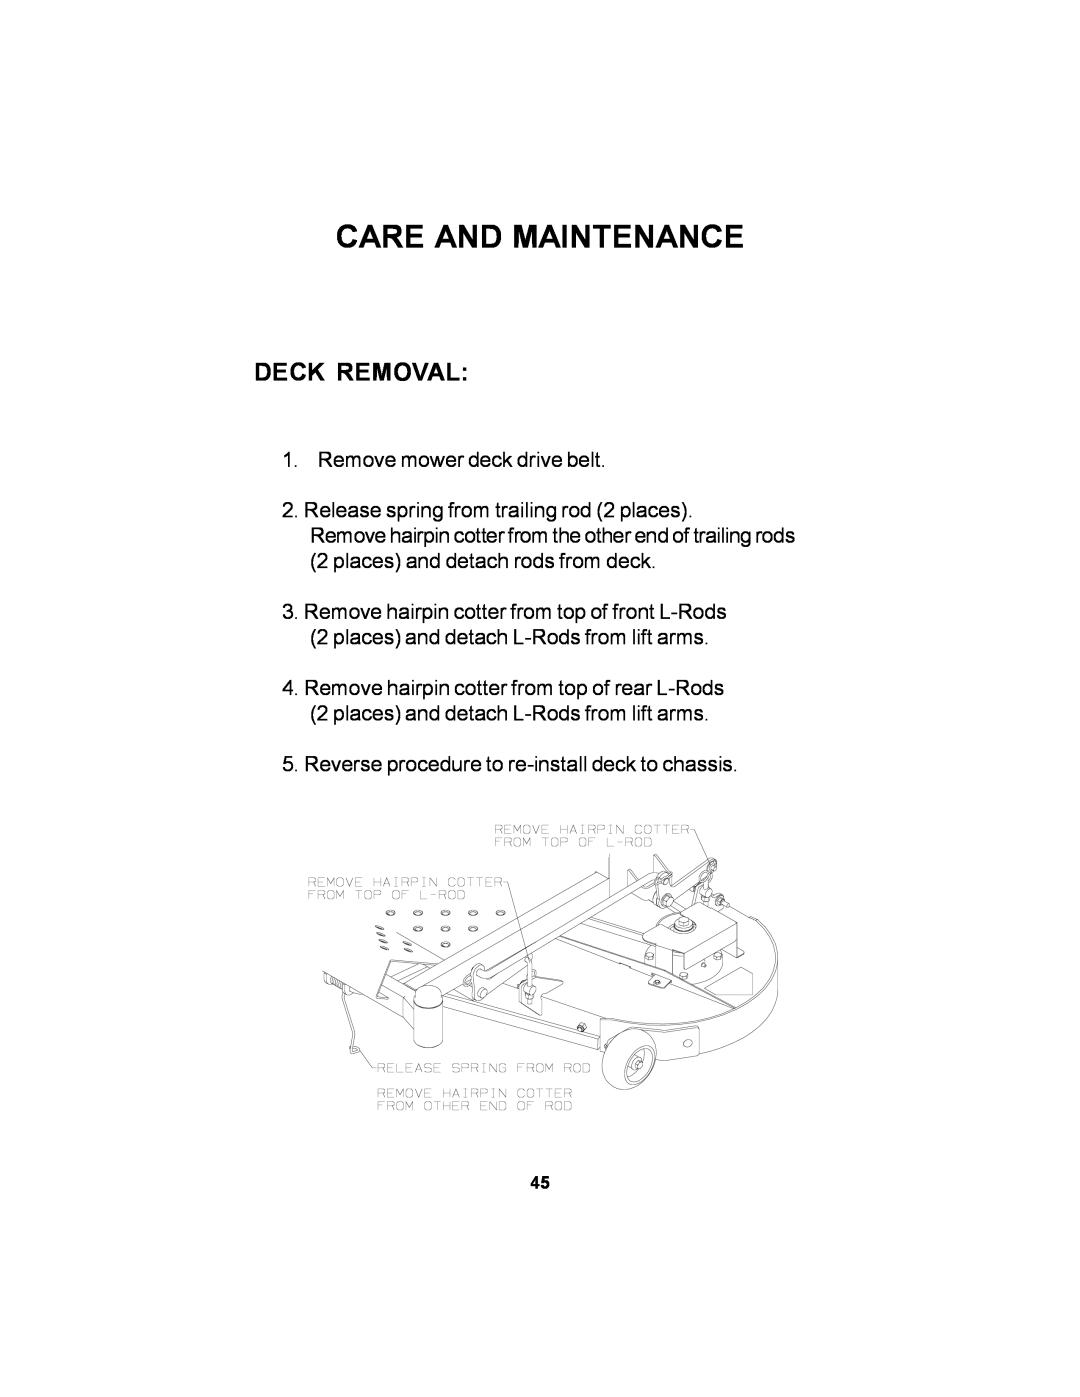 Dixon 36 manual Deck Removal, Care And Maintenance 